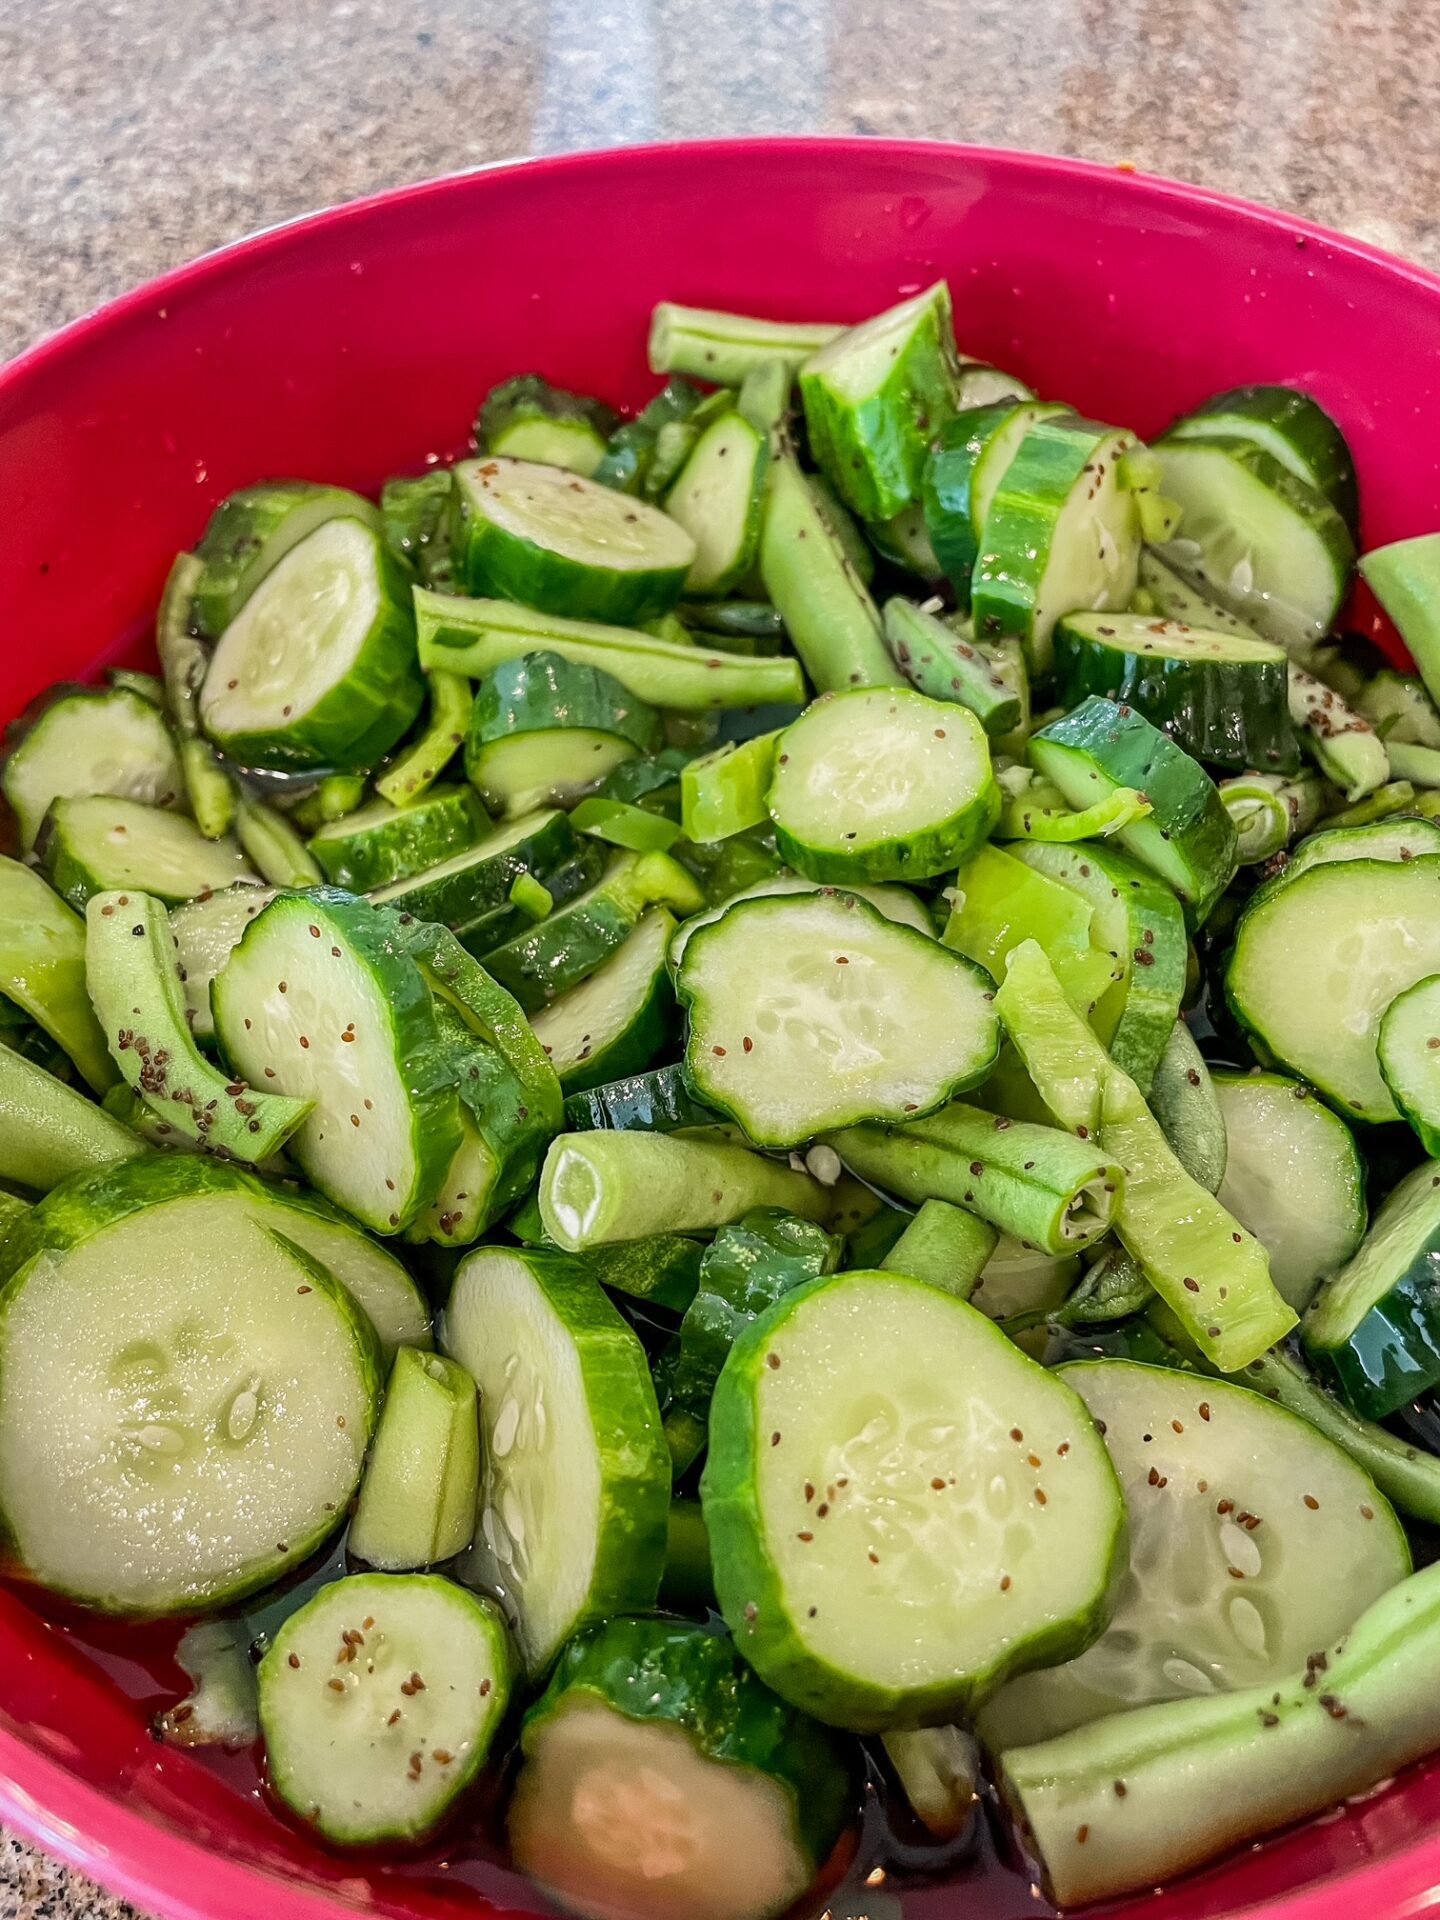 My SPICY FREEZER PICKLES Recipe - on Coming Up Roses